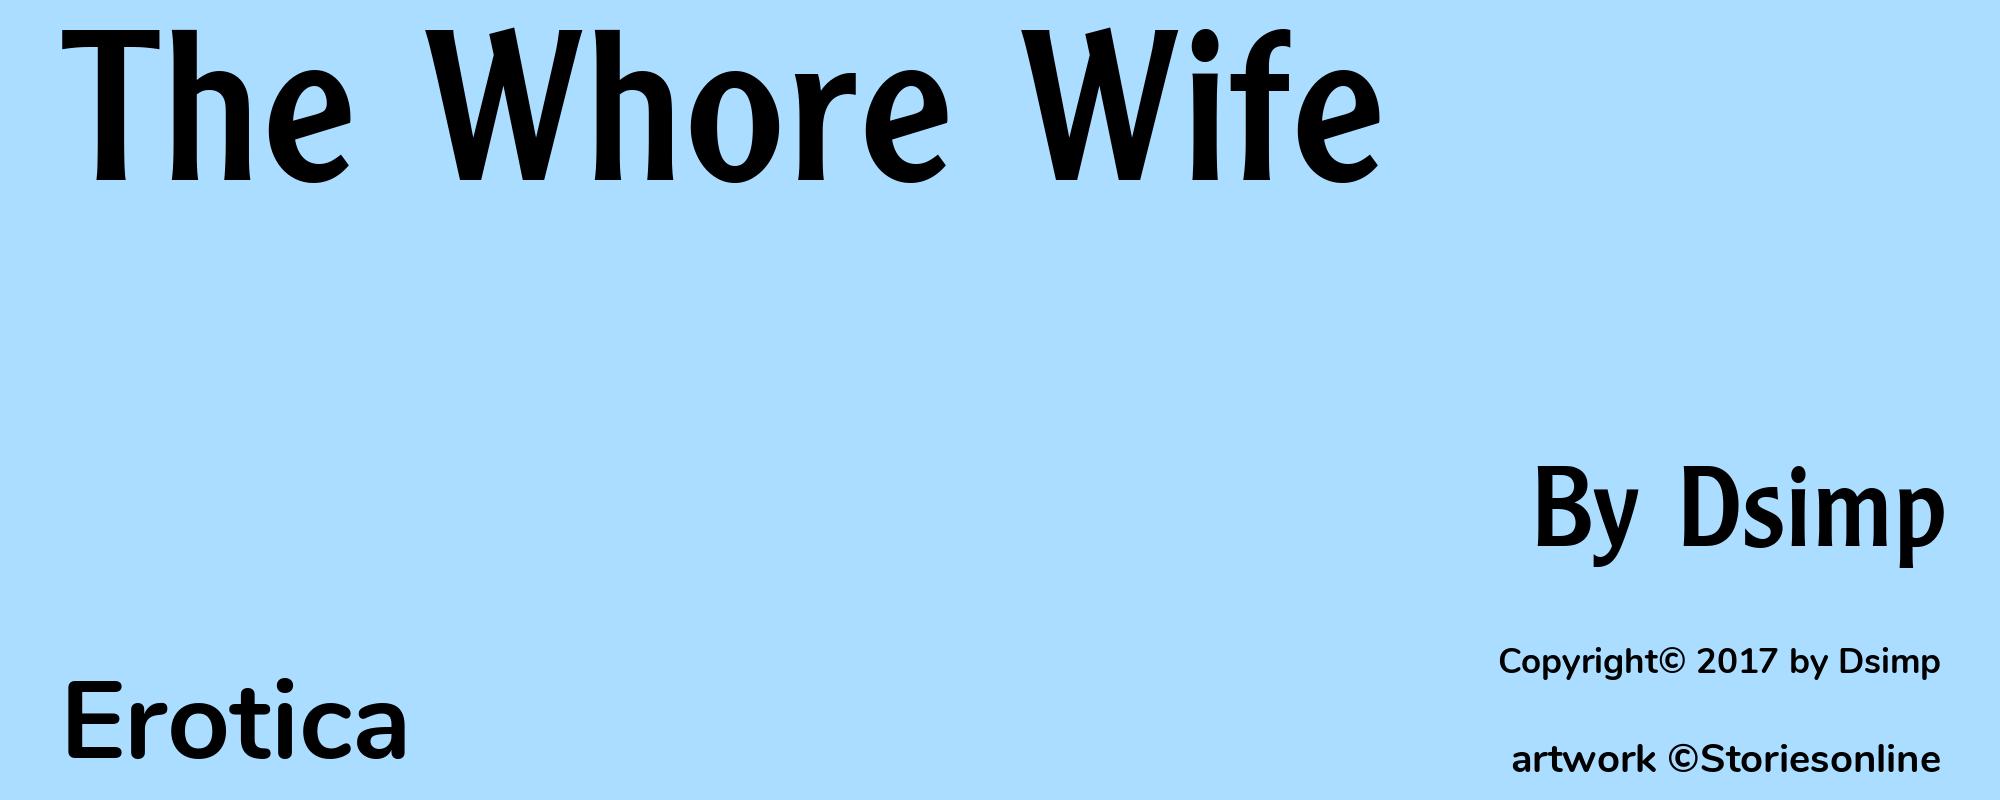 The Whore Wife - Cover